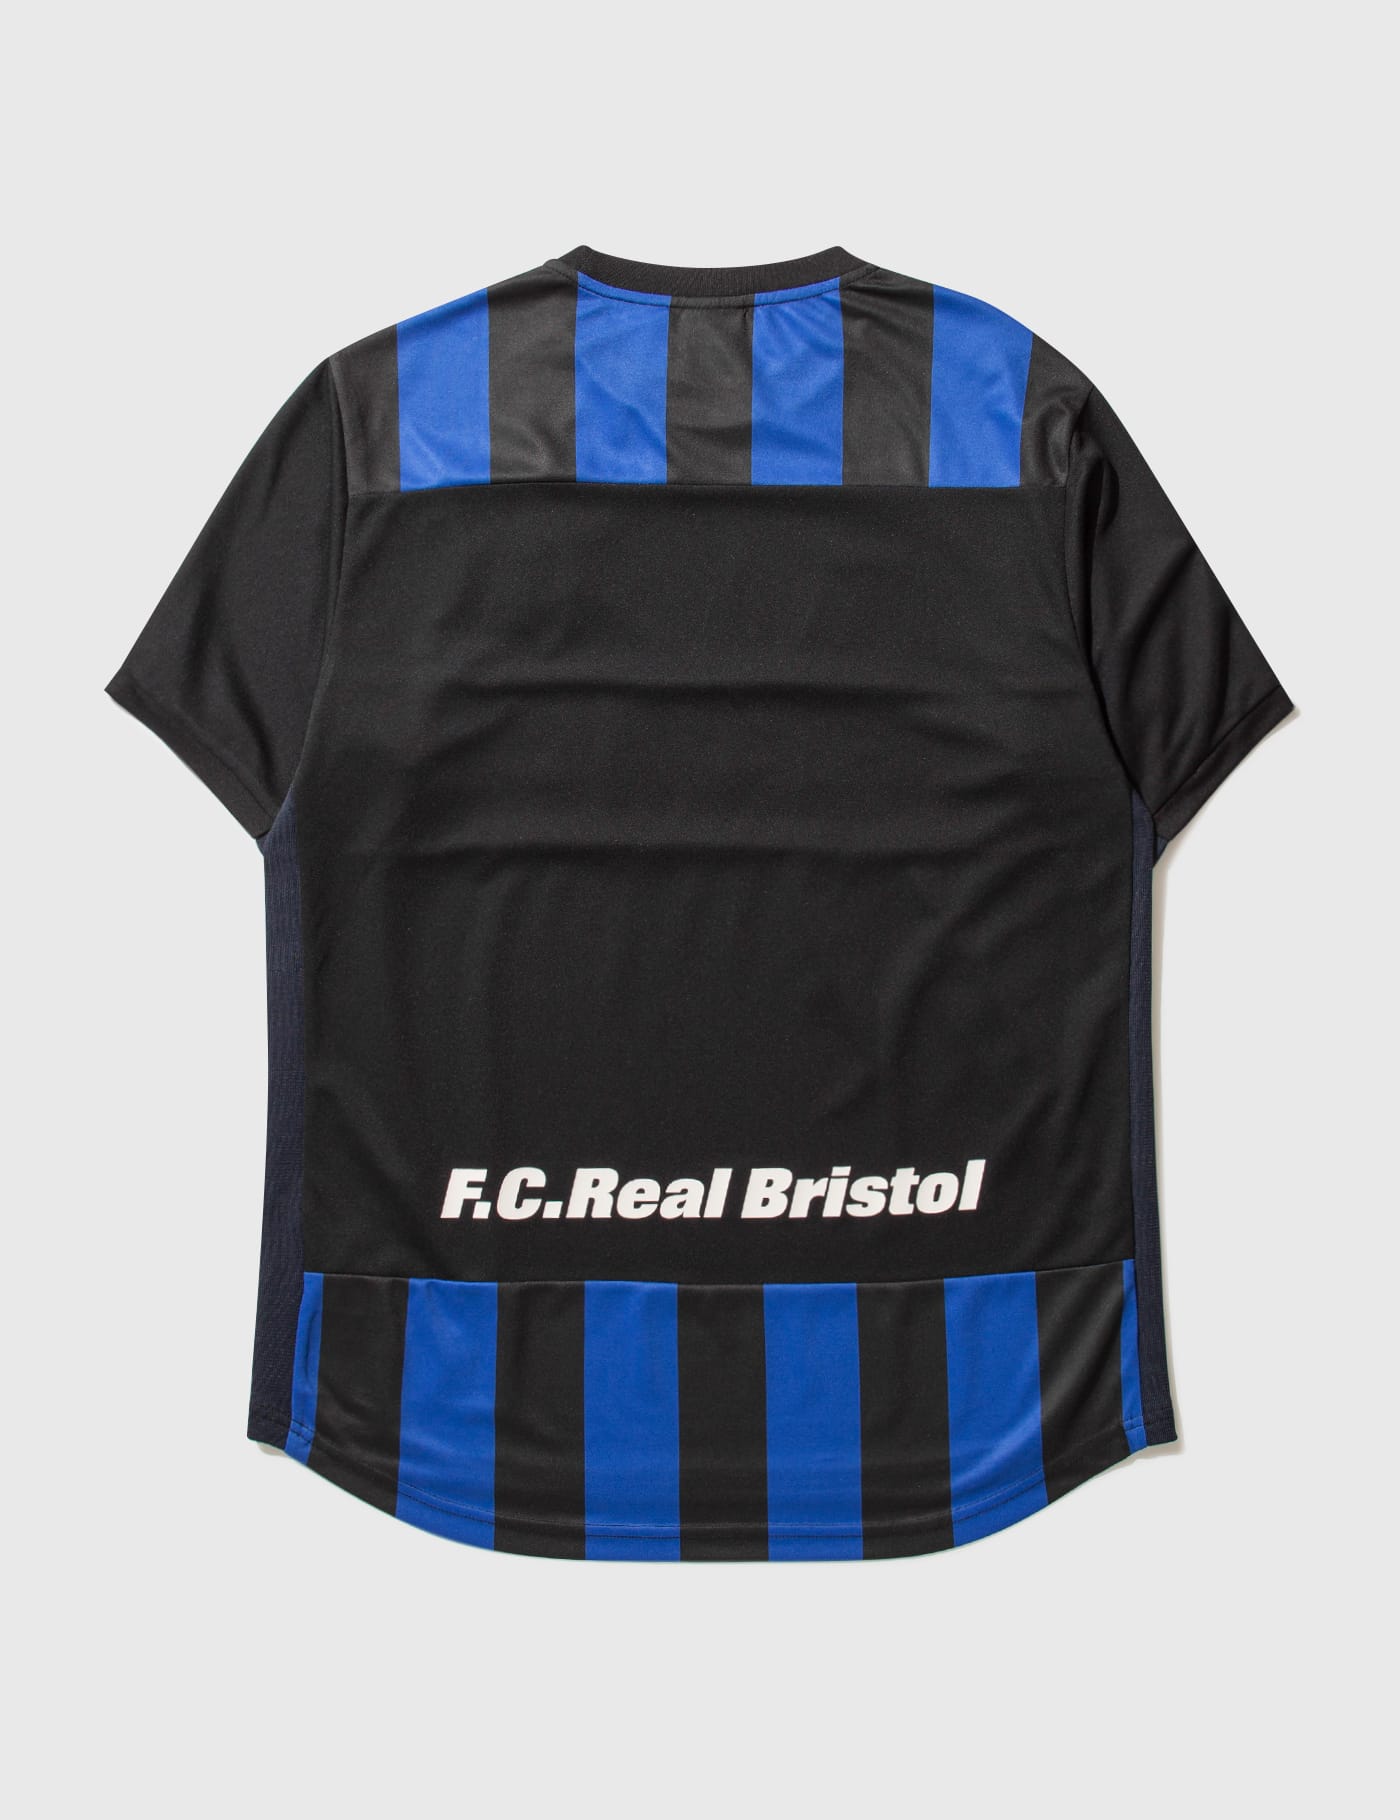 F.C. Real Bristol - MLB Tour Game Shirt | HBX - Globally Curated